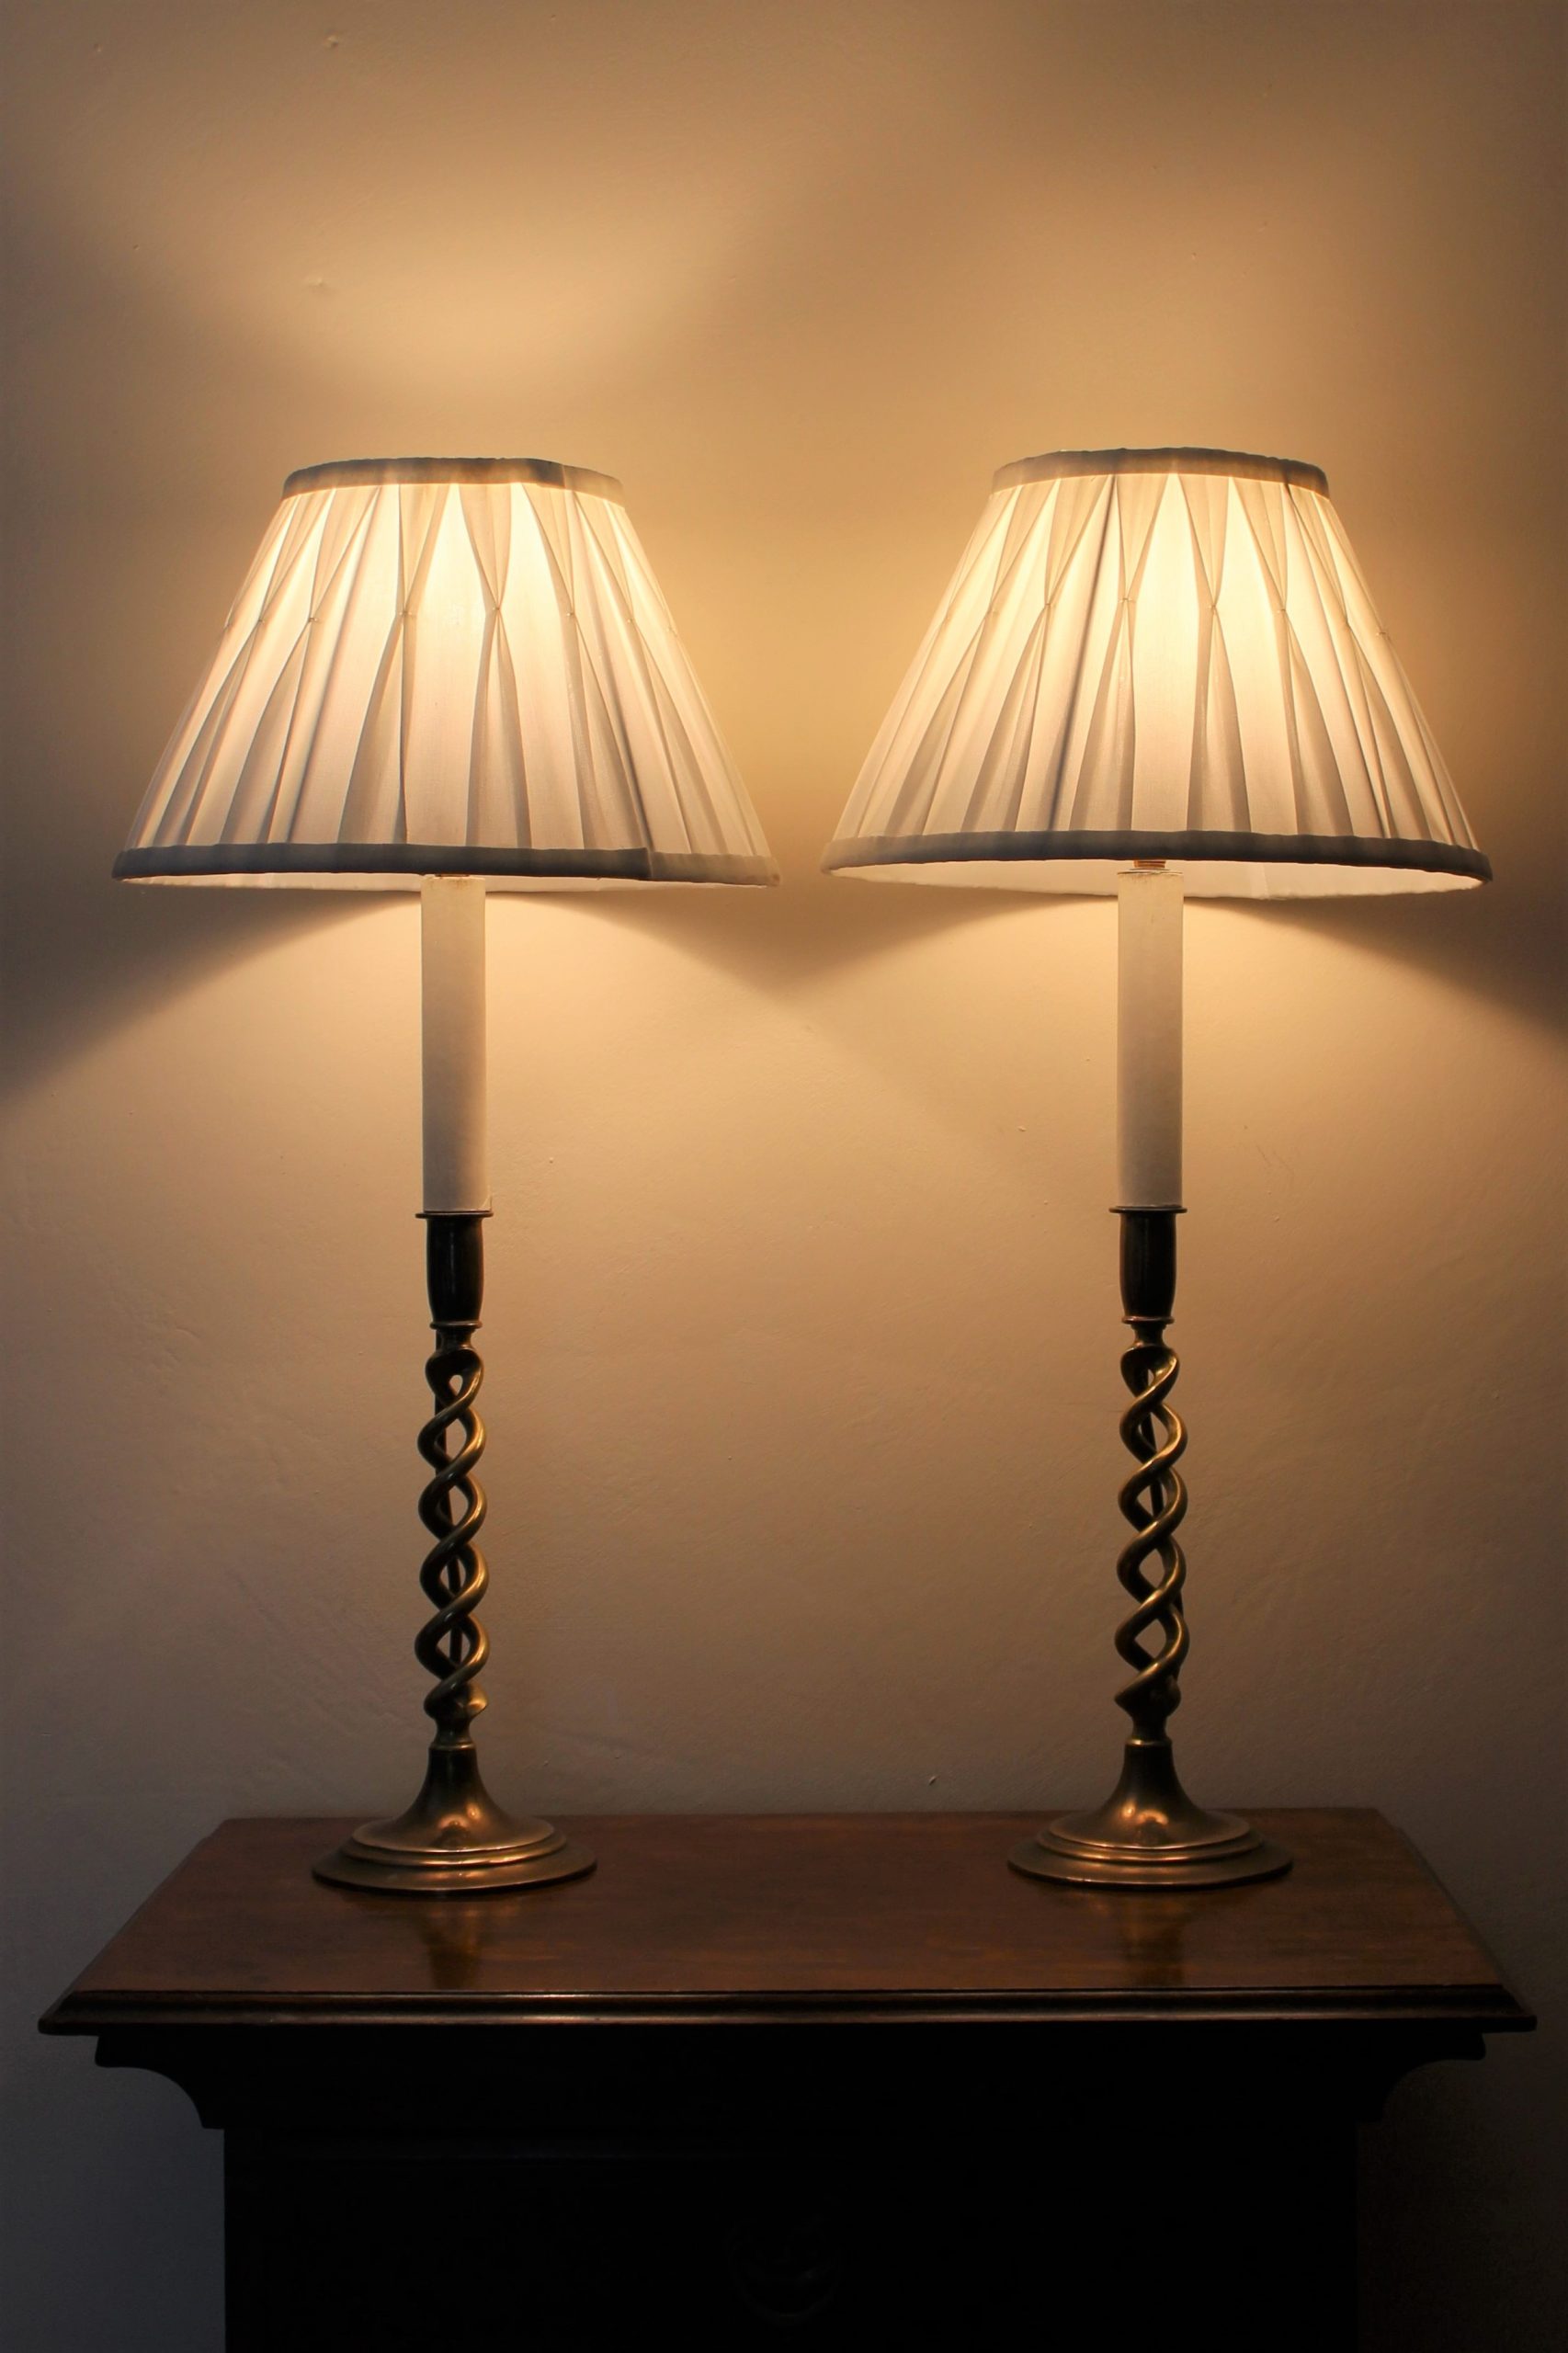 domingo De otra manera límite An attractive pair of Victorian brass Barley Twist candlestick lamps with  lampshades. - James Forster Antiques